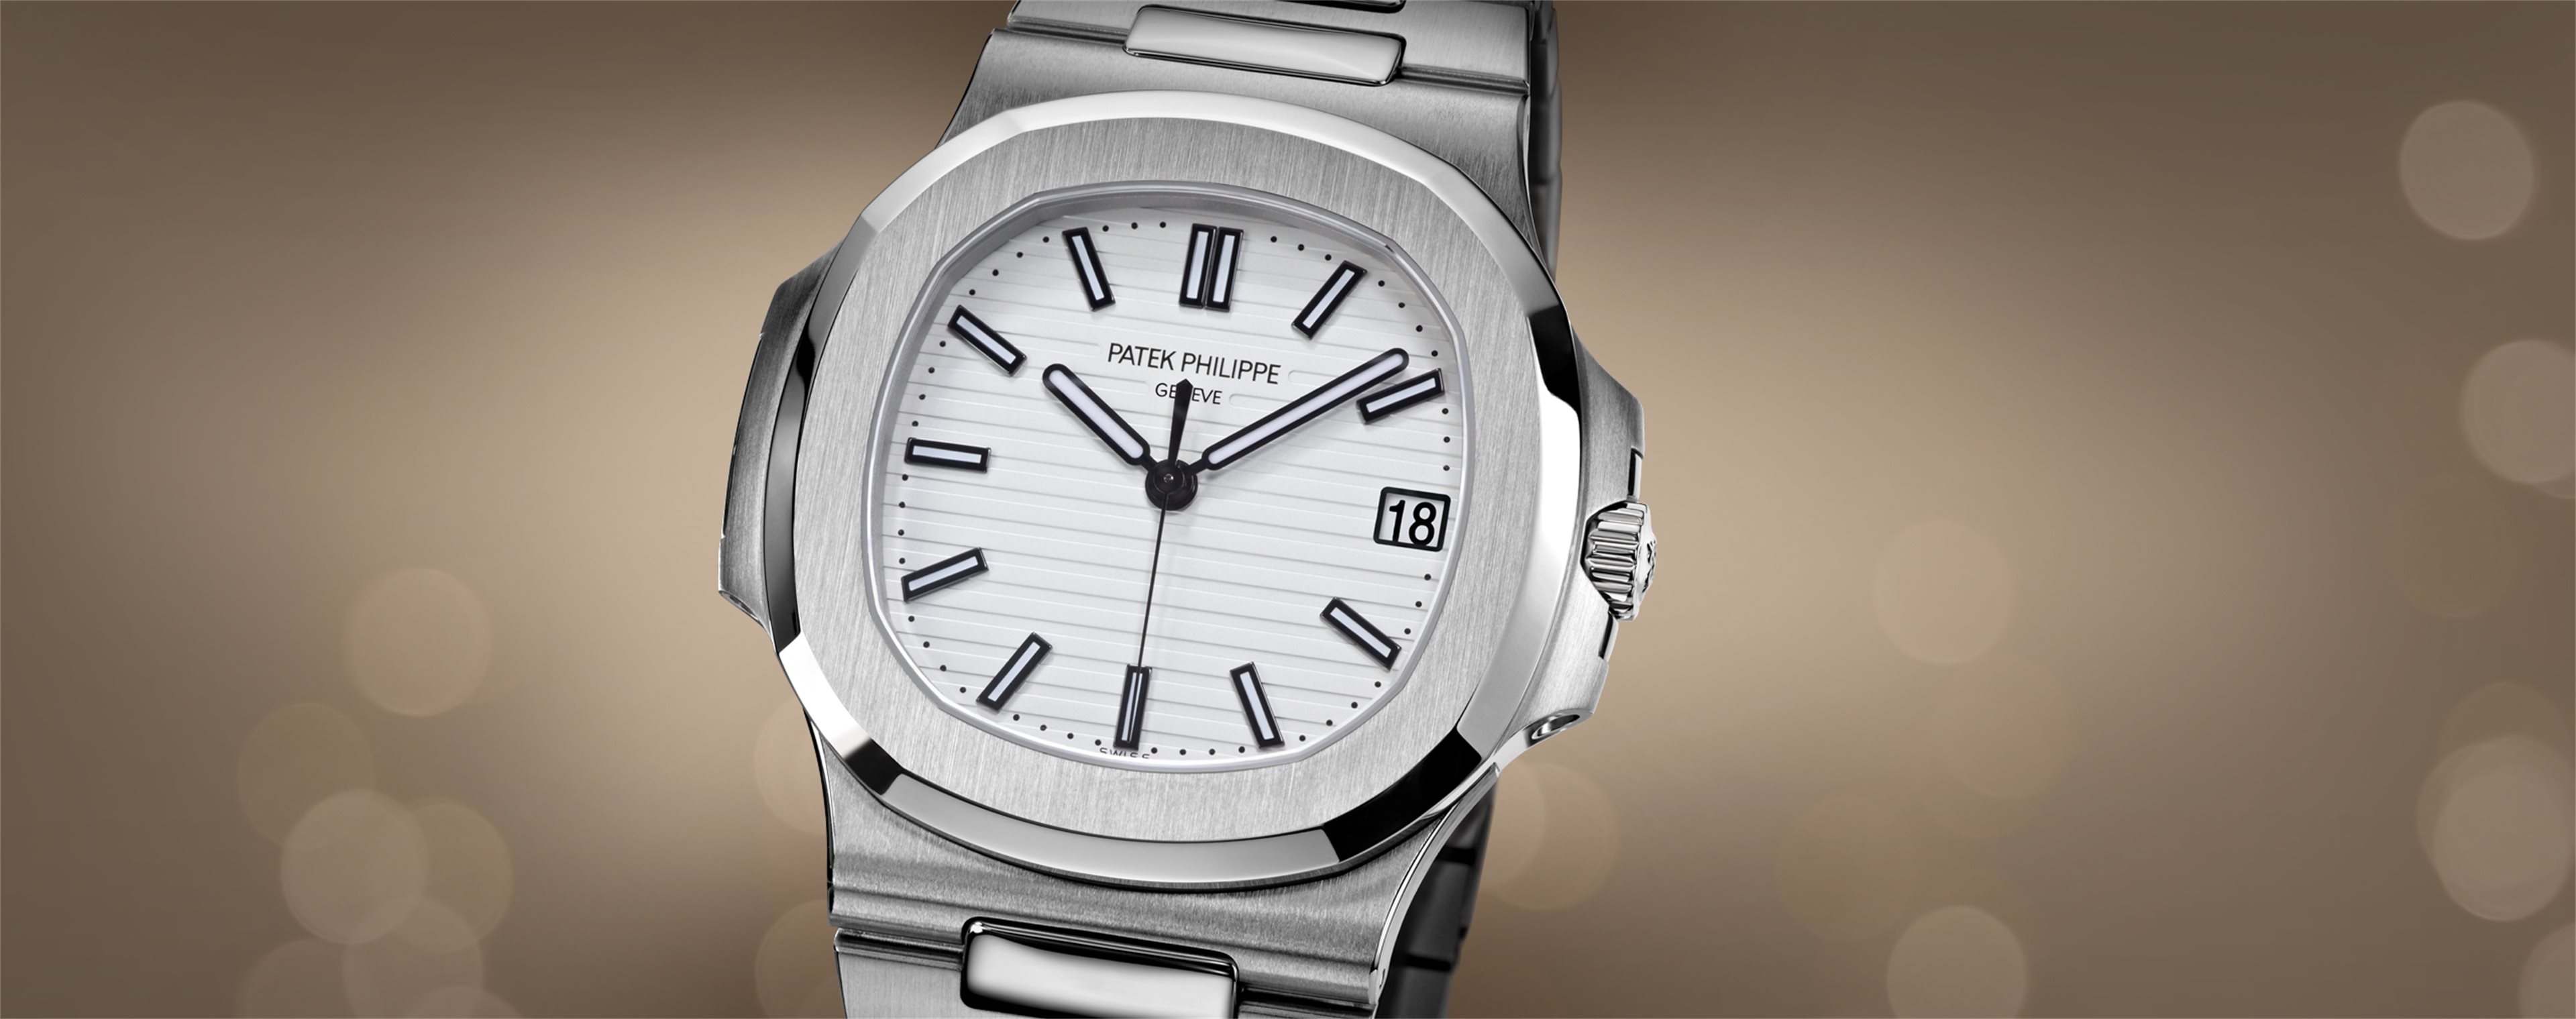 Patek Philippe Nautilus Stainless Steel Silver Index Dial Watch 7118/1A-010